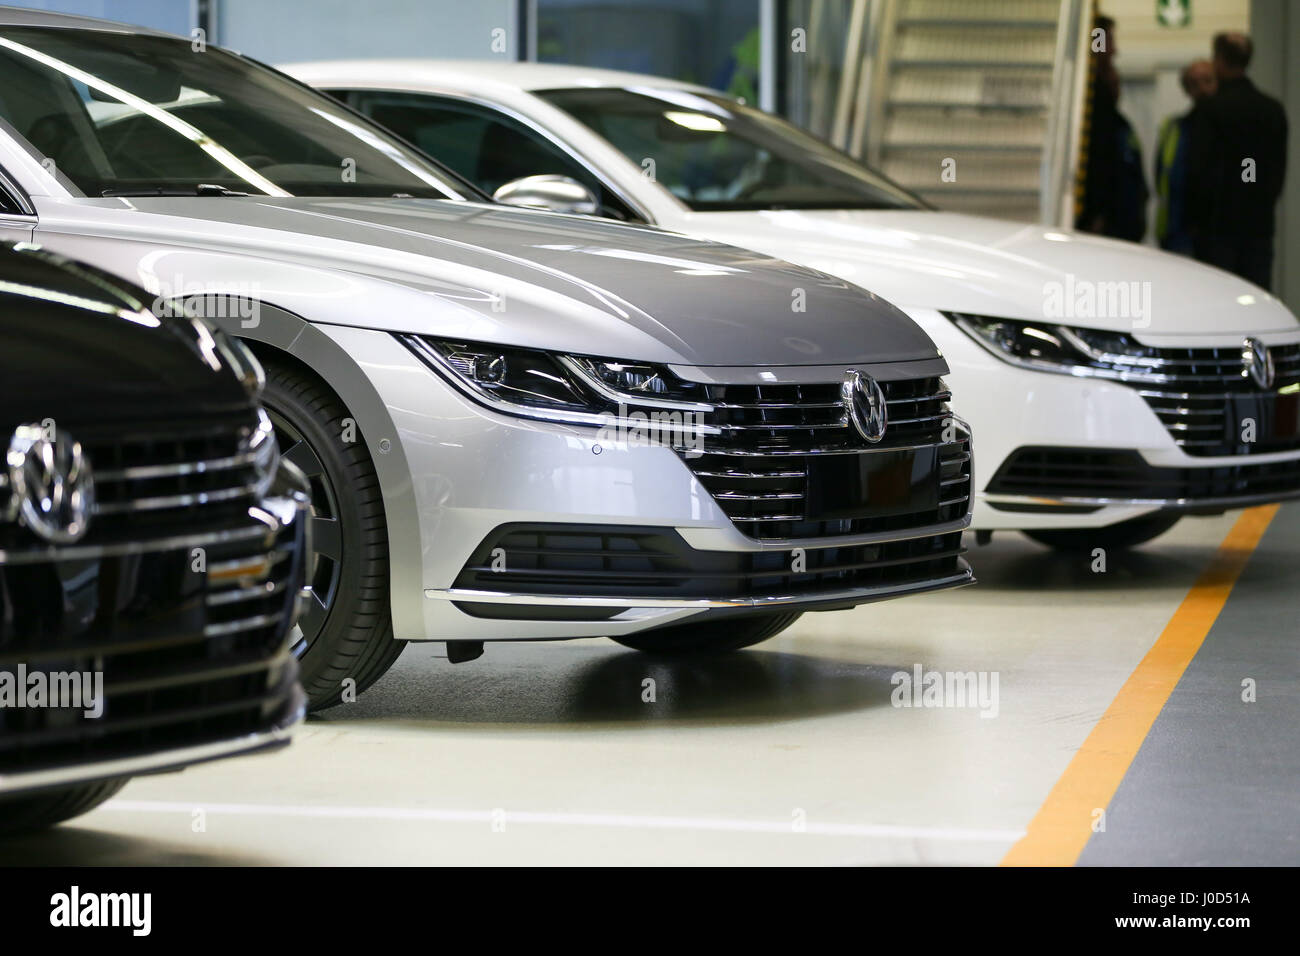 Emden, Germany. 12th Apr, 2017. VW Arteon cars can be seen during its presentation in Emden, Germany, 12 April 2017. The new Volkswagen model Arteon will be built in Emden. After low sale numbers of the VW Passat model, the VW factory in Emden hopes for a success with the new Arteon. Photo: Mohssen Assanimoghaddam/dpa/Alamy Live News Stock Photo